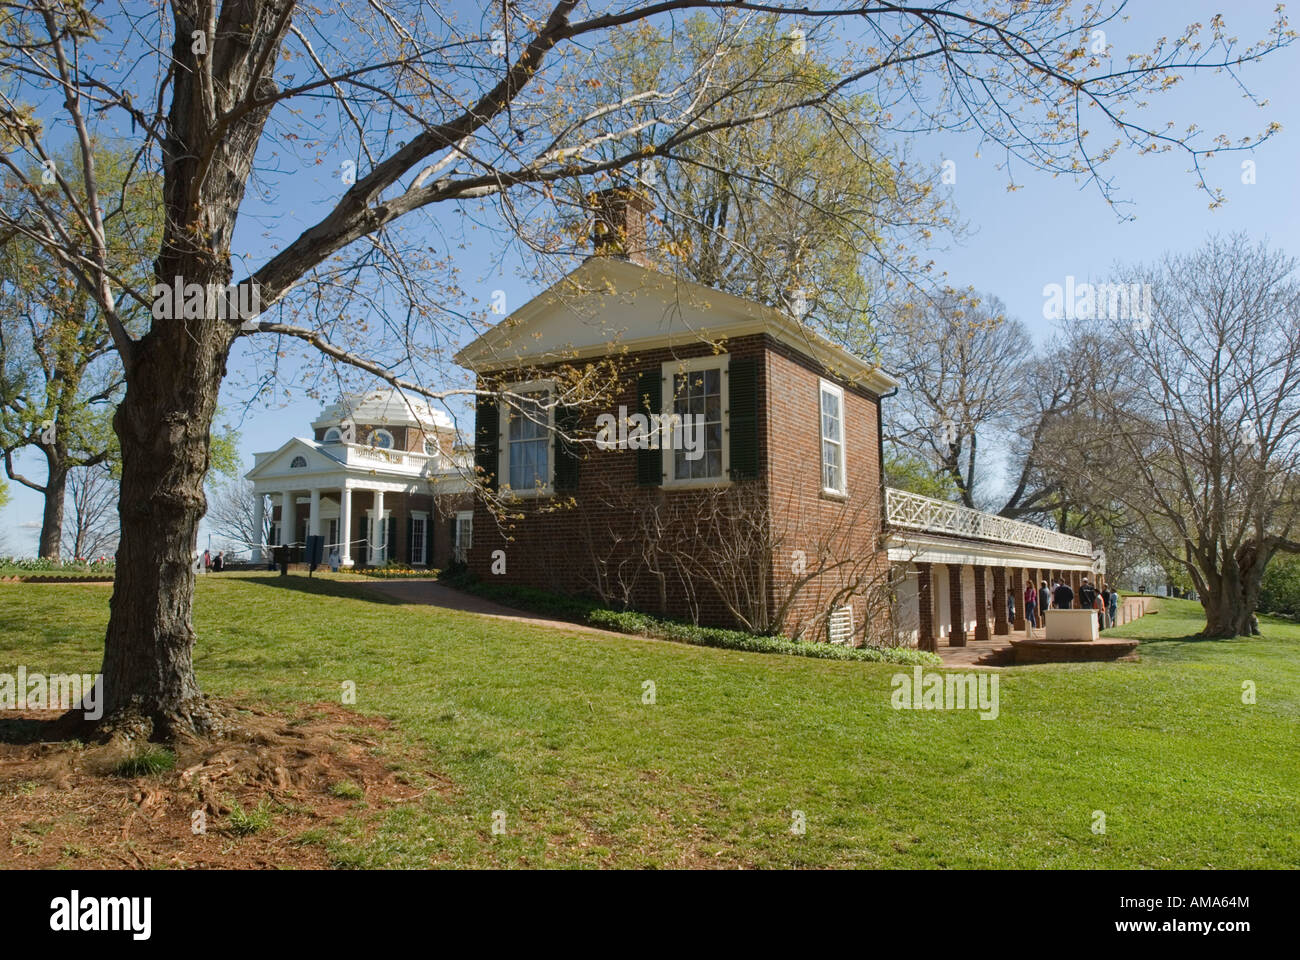 Slave quarters on the grounds of Thomas Jefferson's home, Monticello, in Virginia. Stock Photo